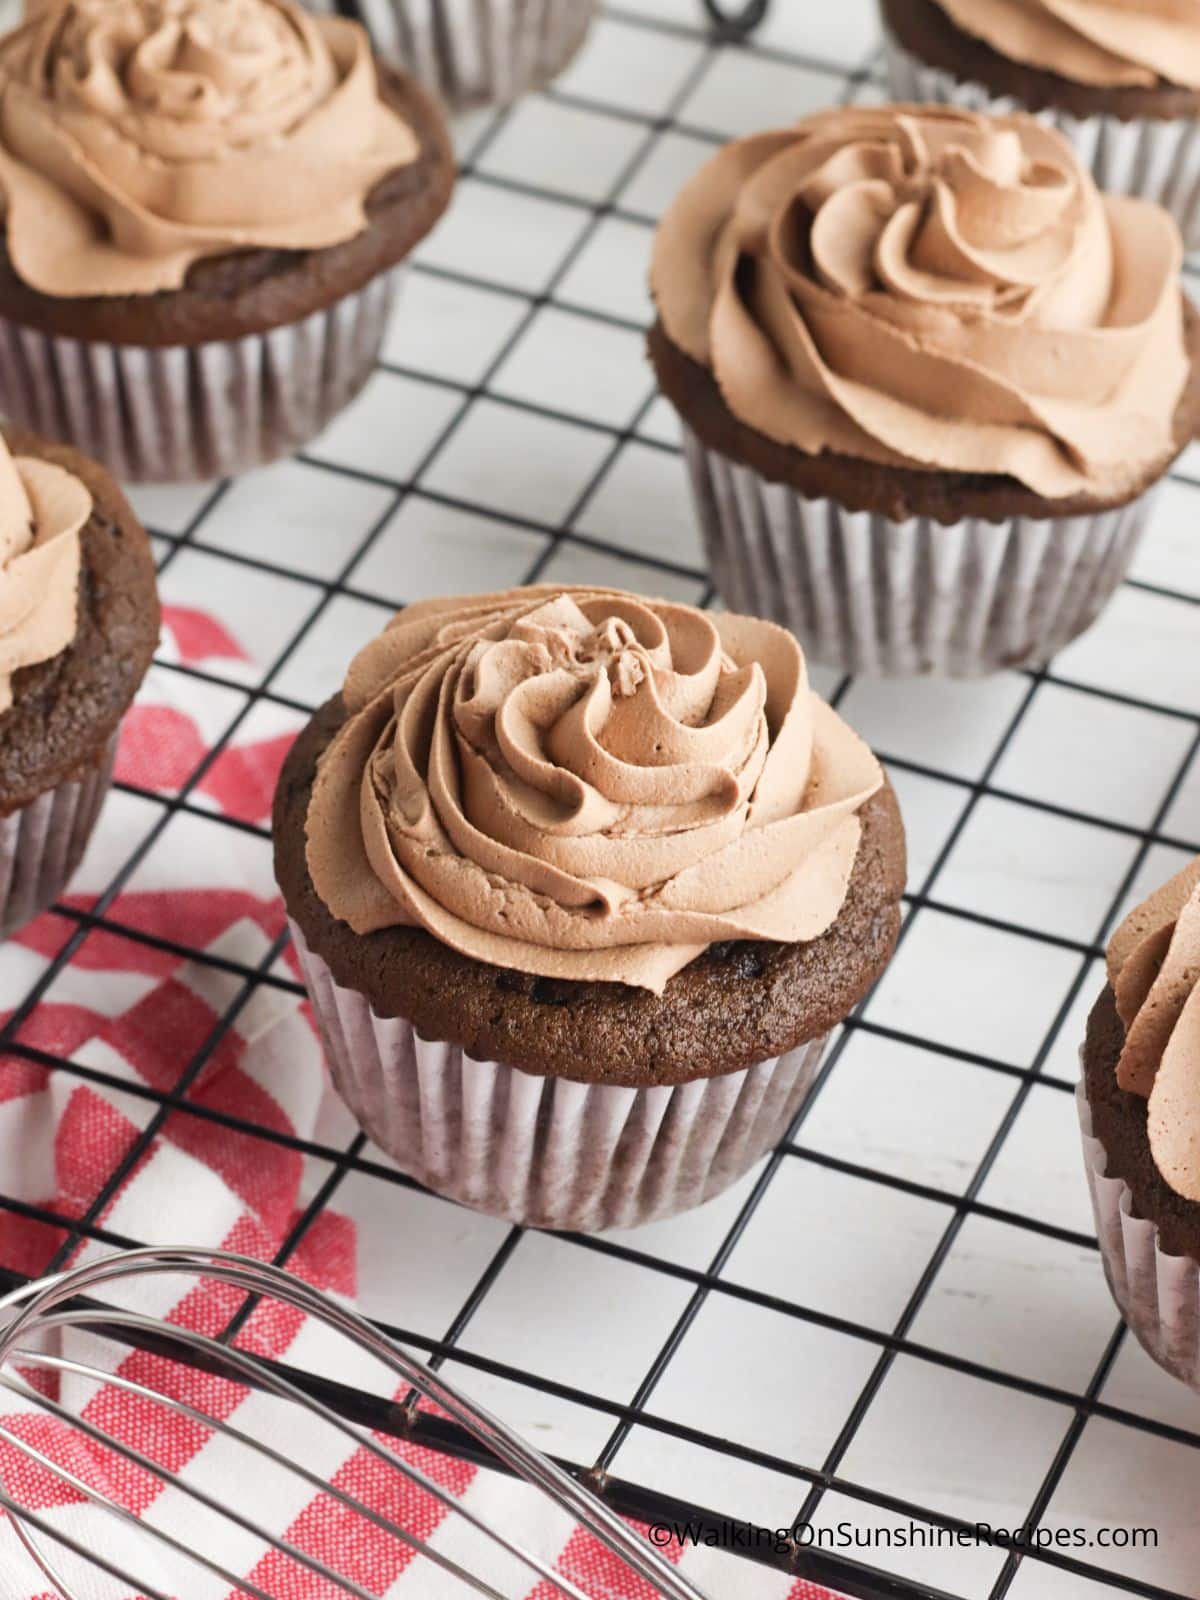 Add chocolate peppermint frosting to top of baked cupcakes.